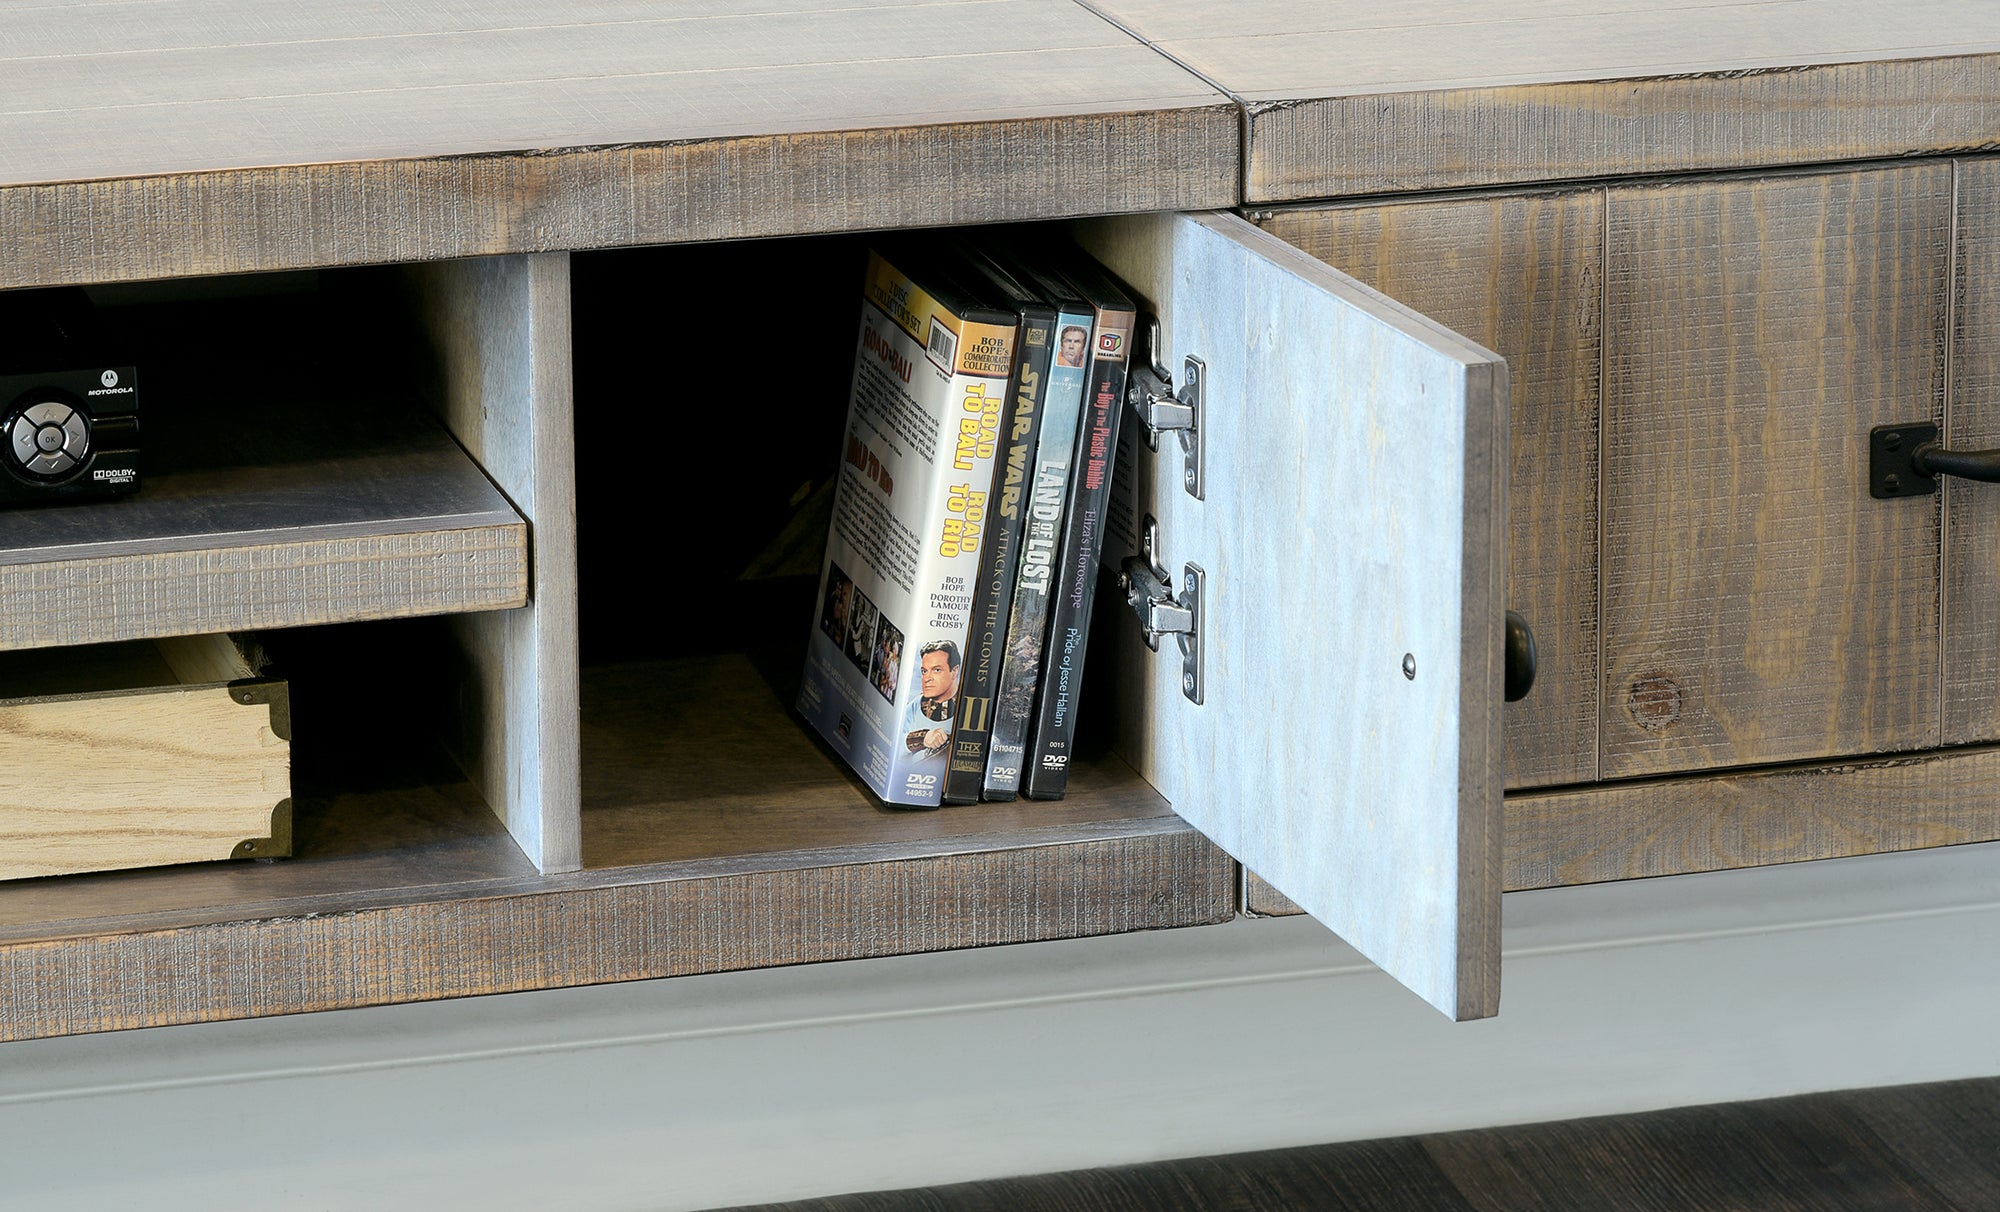 Floating TV Stand - Woodwaves - Rustic Floating Entertainment Center - Farmhouse Collection - Lakewood Gray